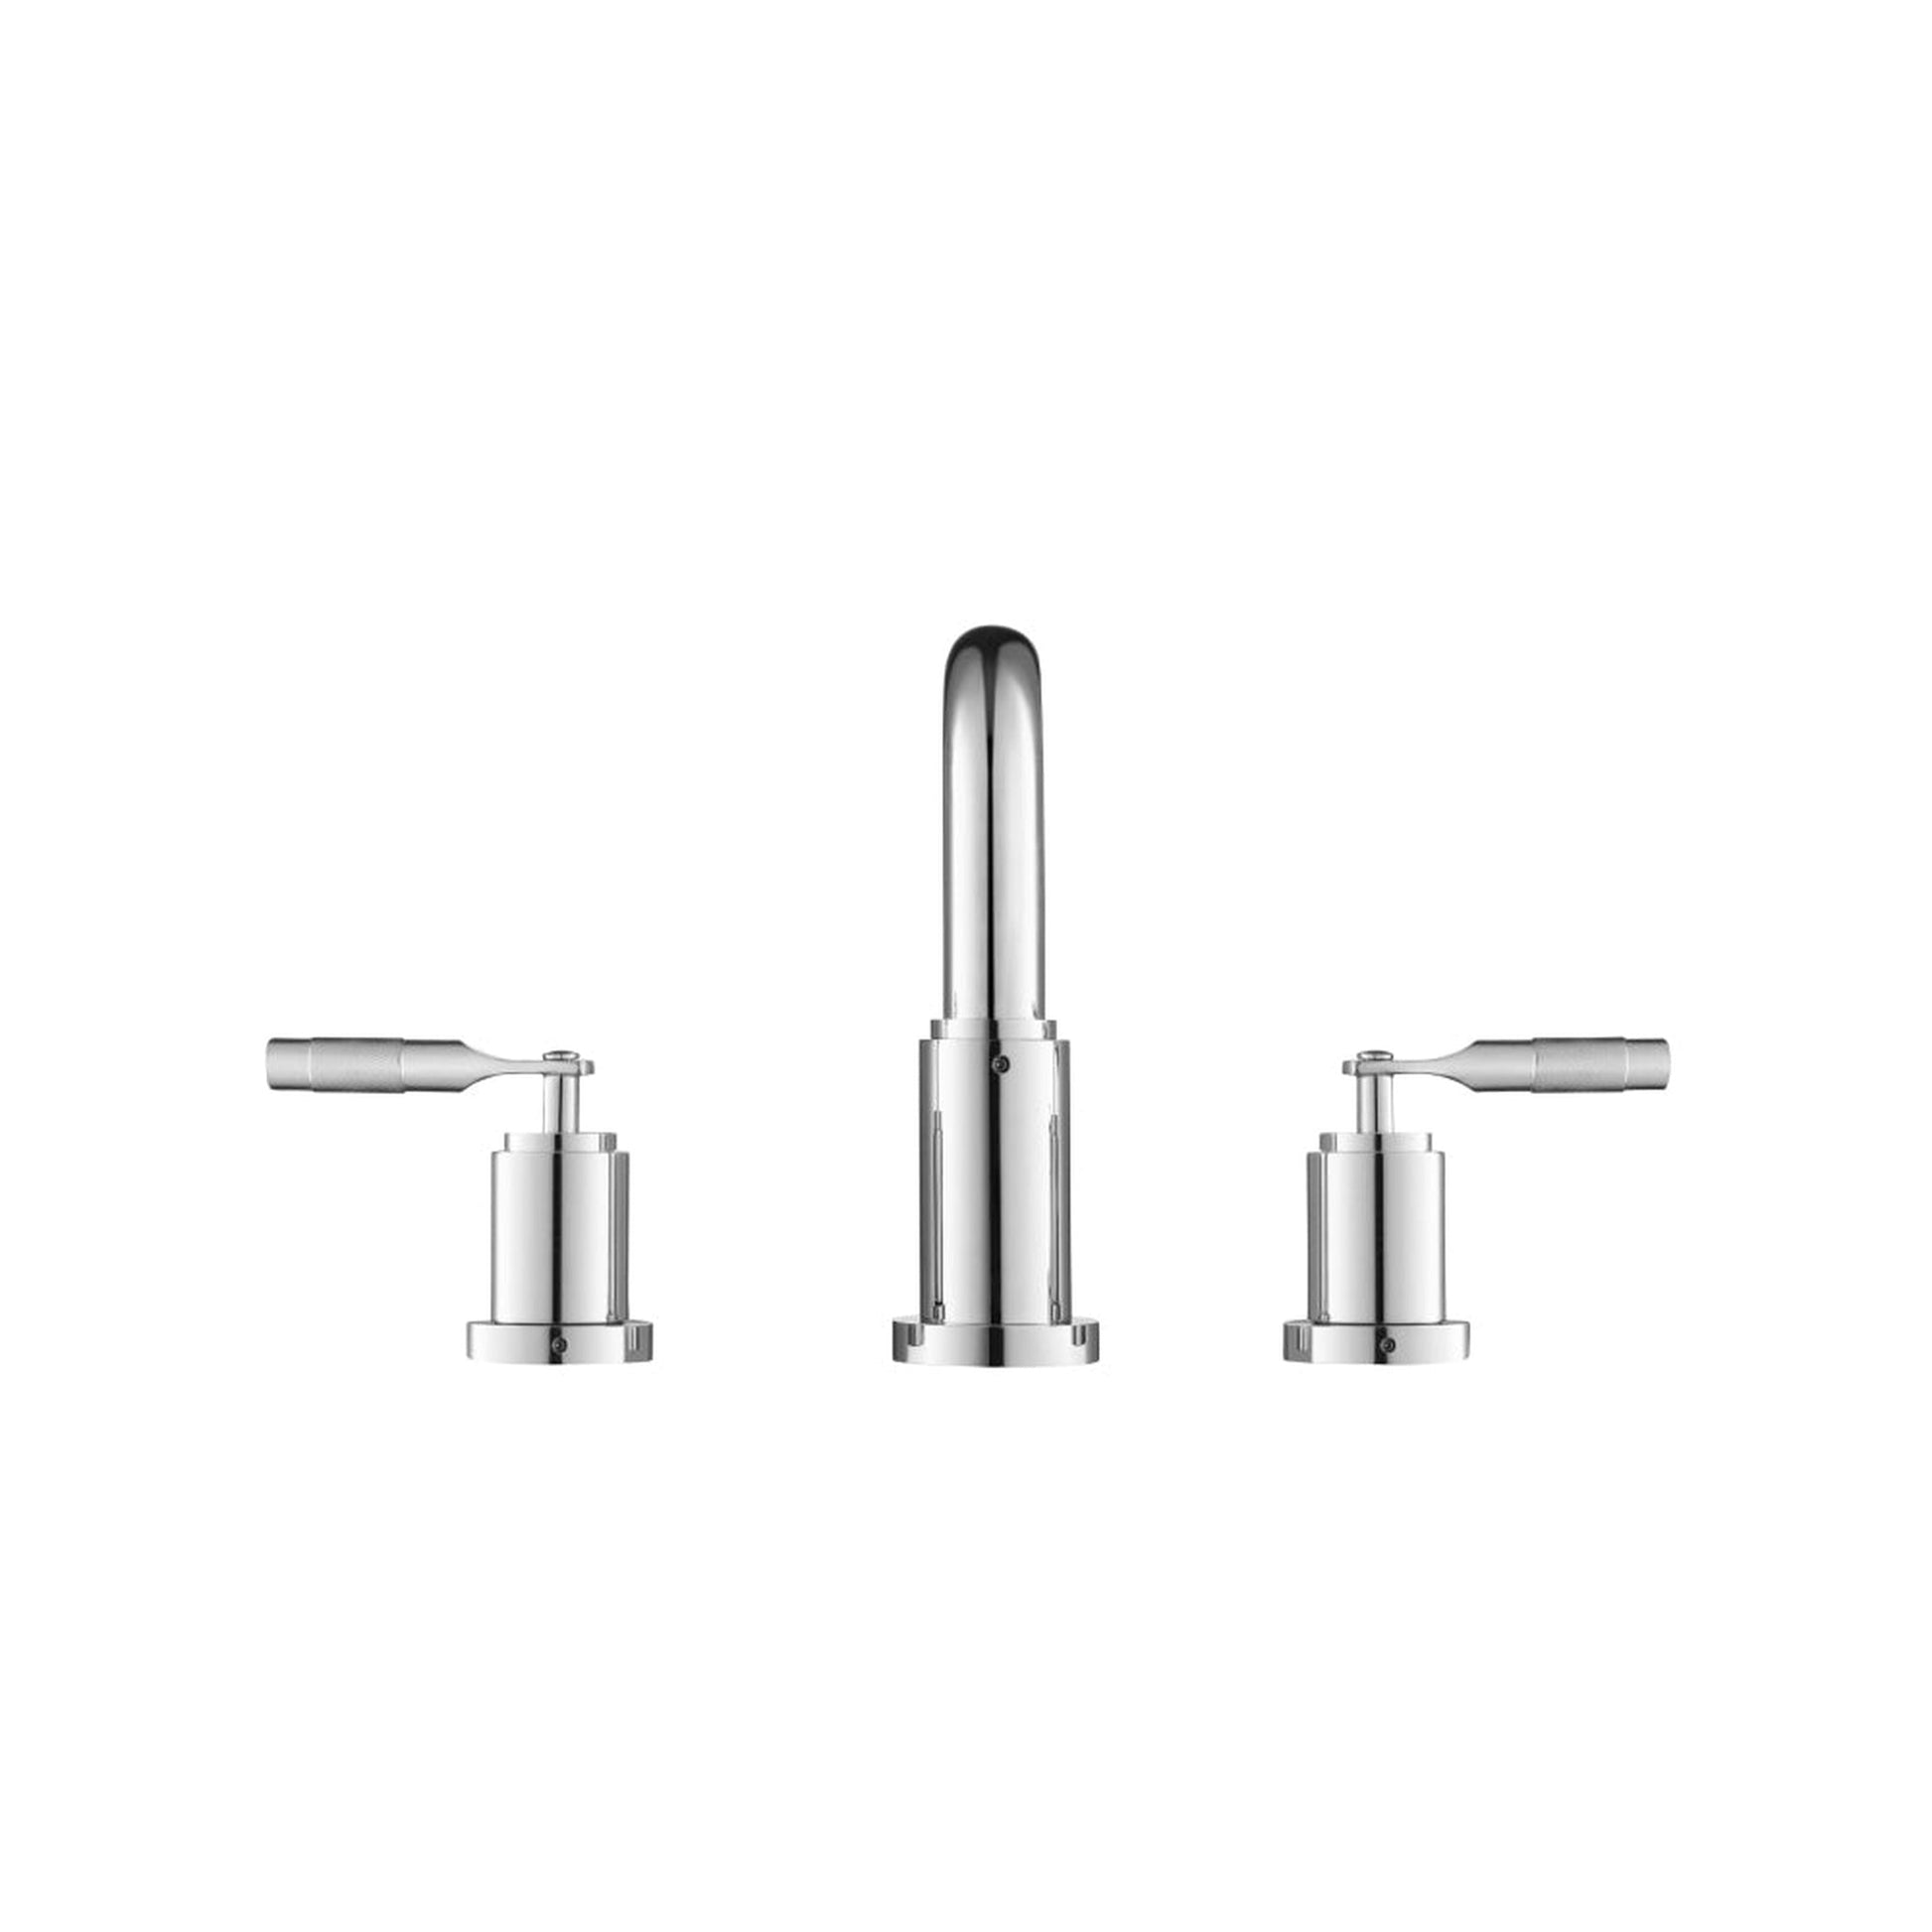 Isenberg Serie 250 14" Three-Hole Chrome Solid Brass Deck-Mounted Widespread Bathroom Sink Faucet With Overflow Pop-Up Drain